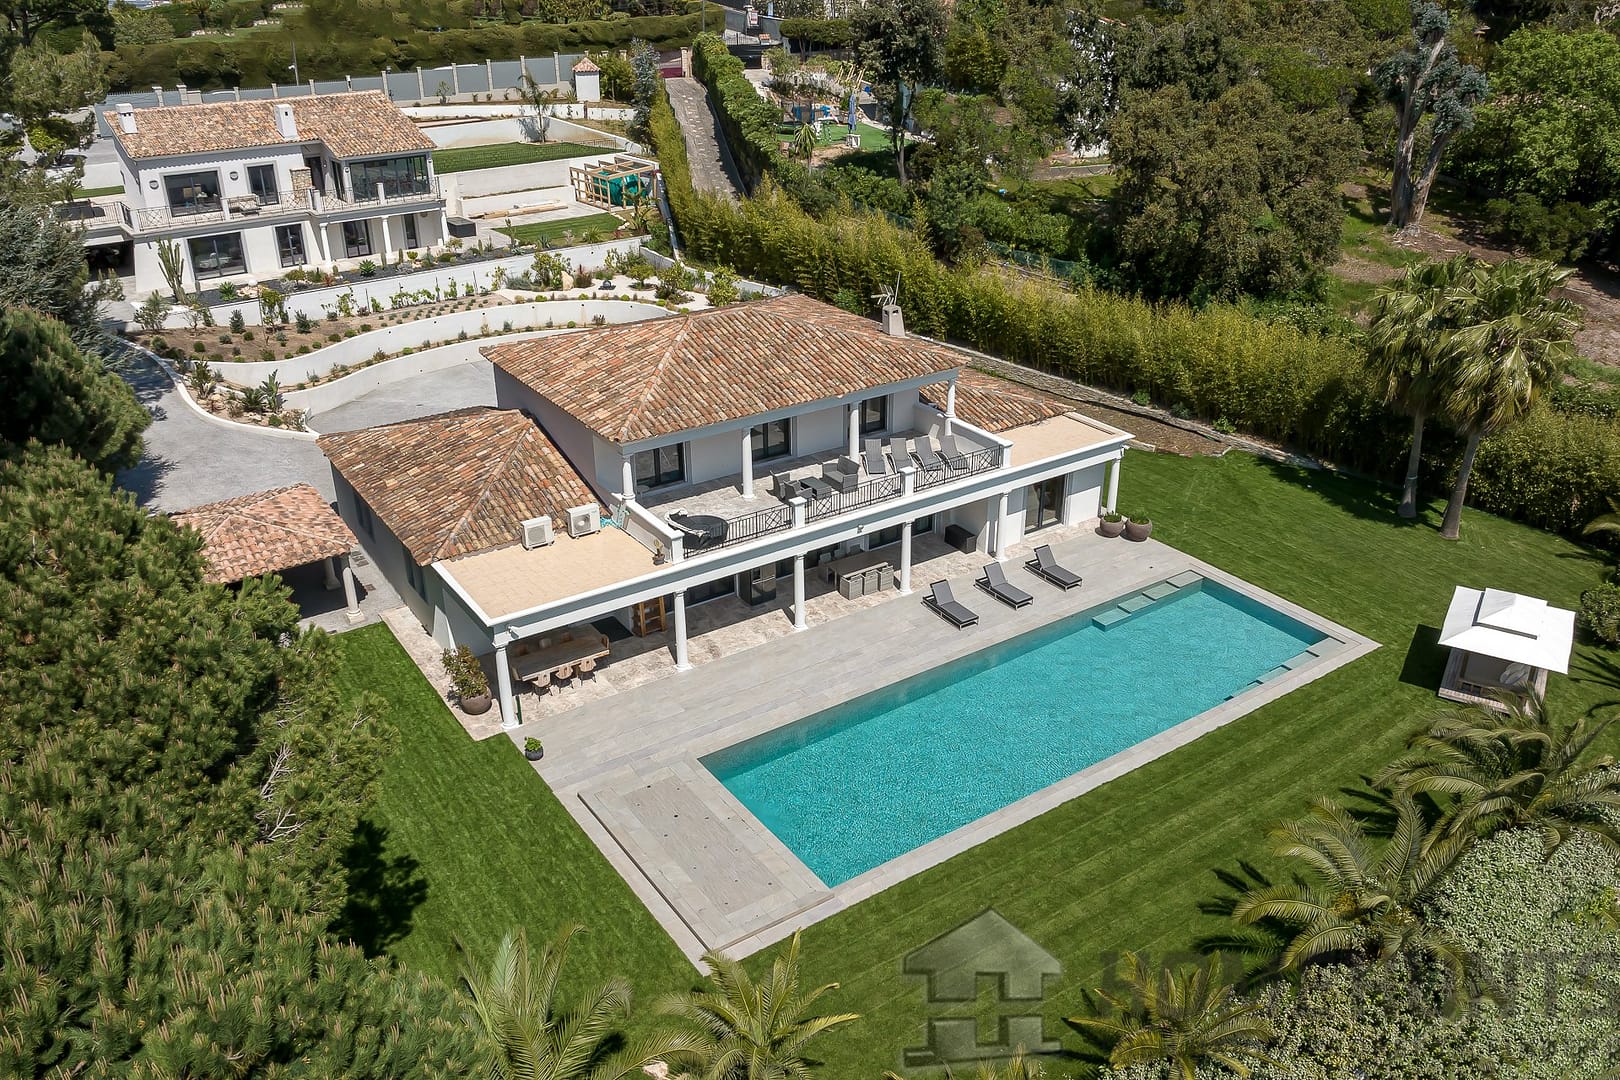 7 Bedroom Villa/House in Cannes 8